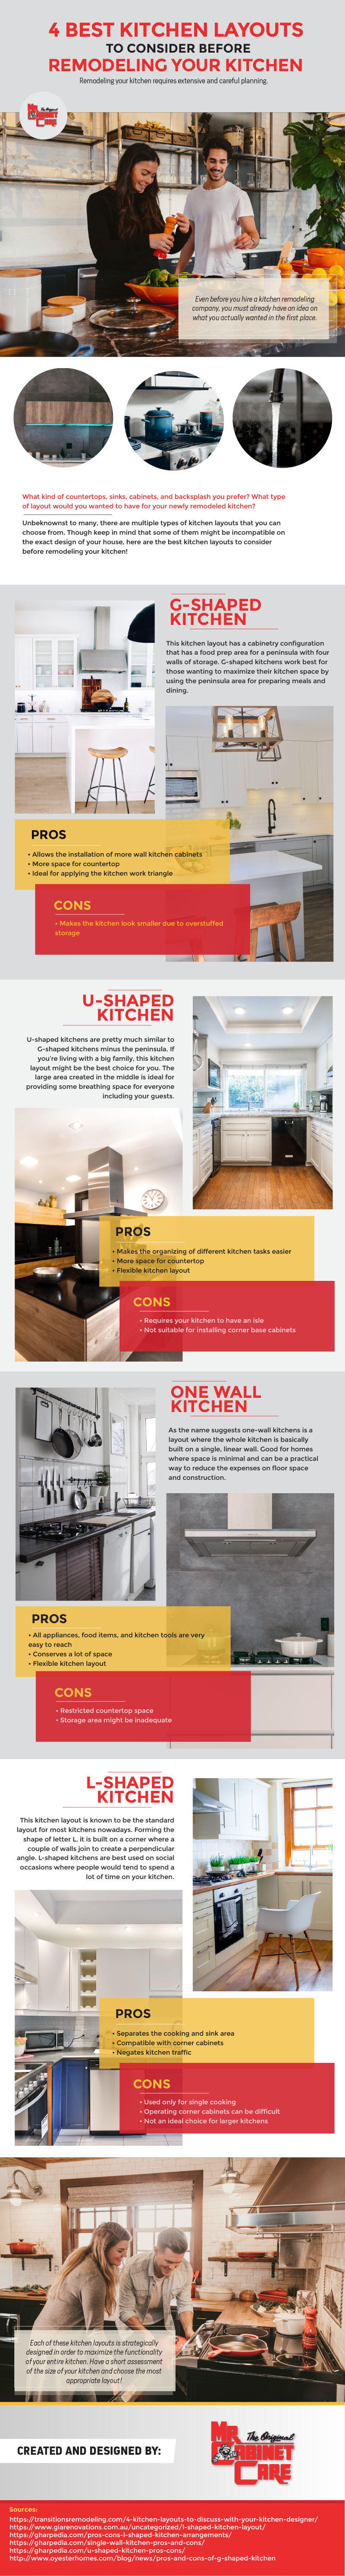 4 Best Kitchen Layouts to Consider Before Remodeling Your Kitchen - Infographic